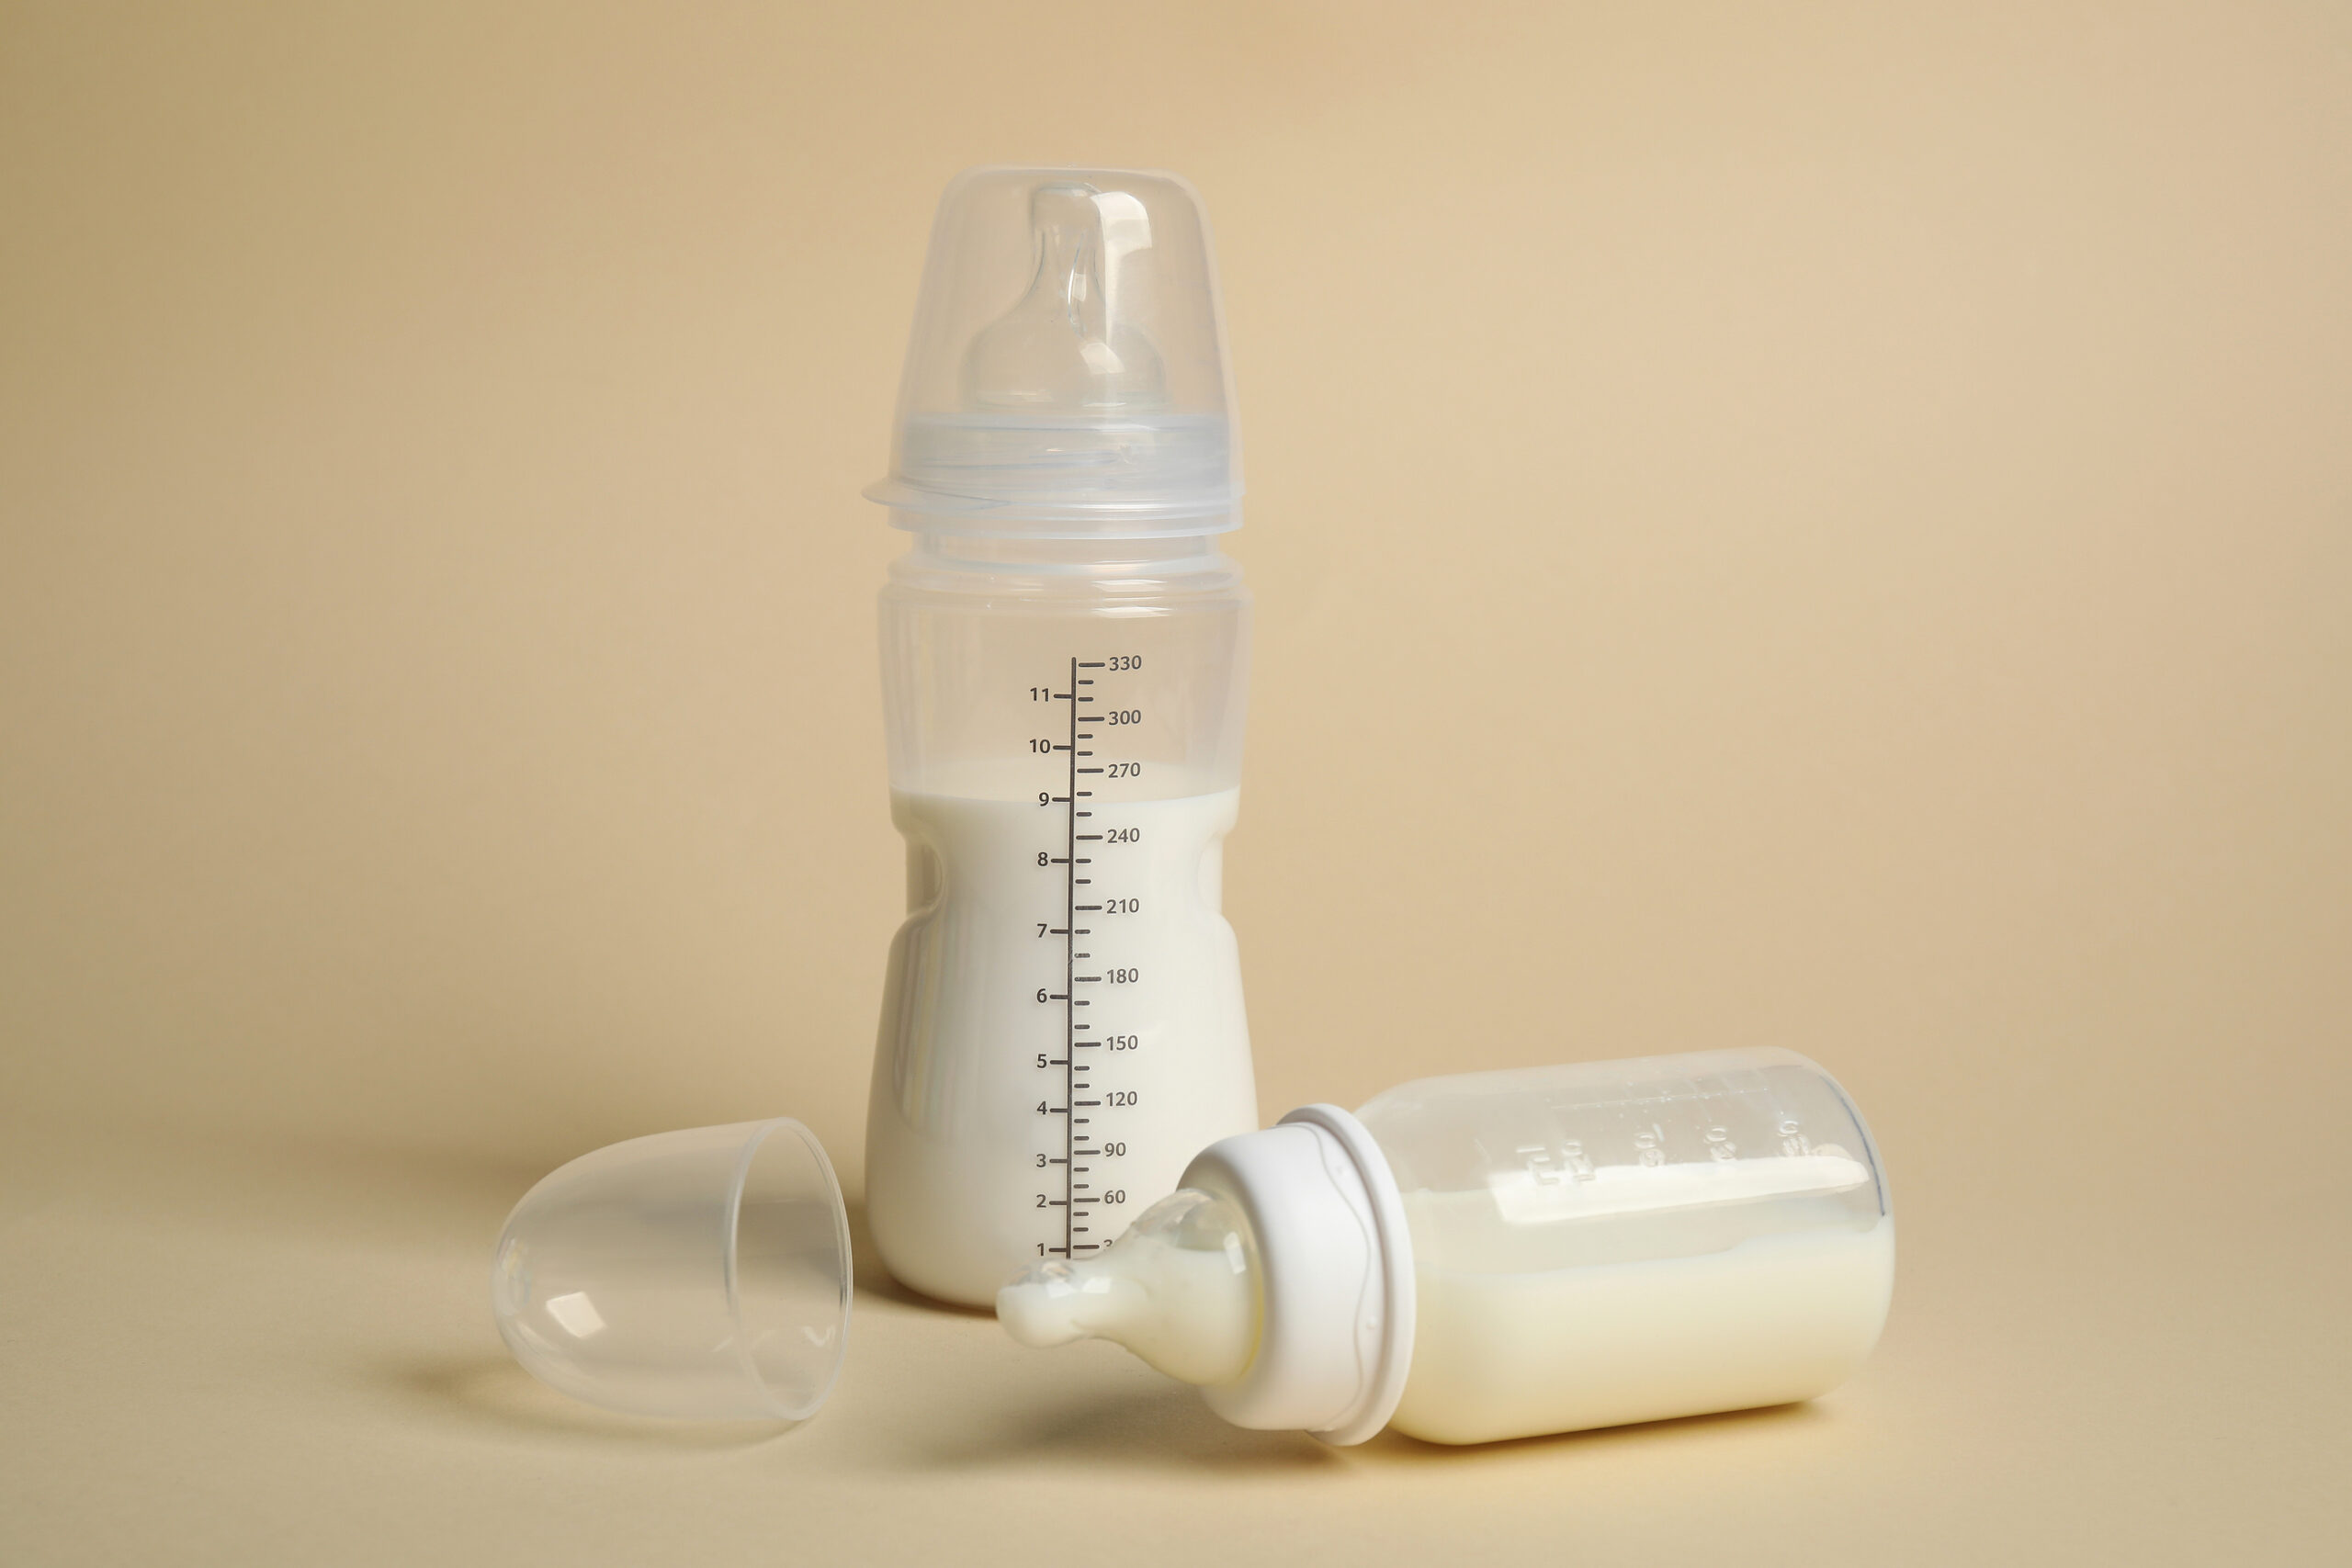 Unreliable Studies Used to Support Baby Formula Health Claims